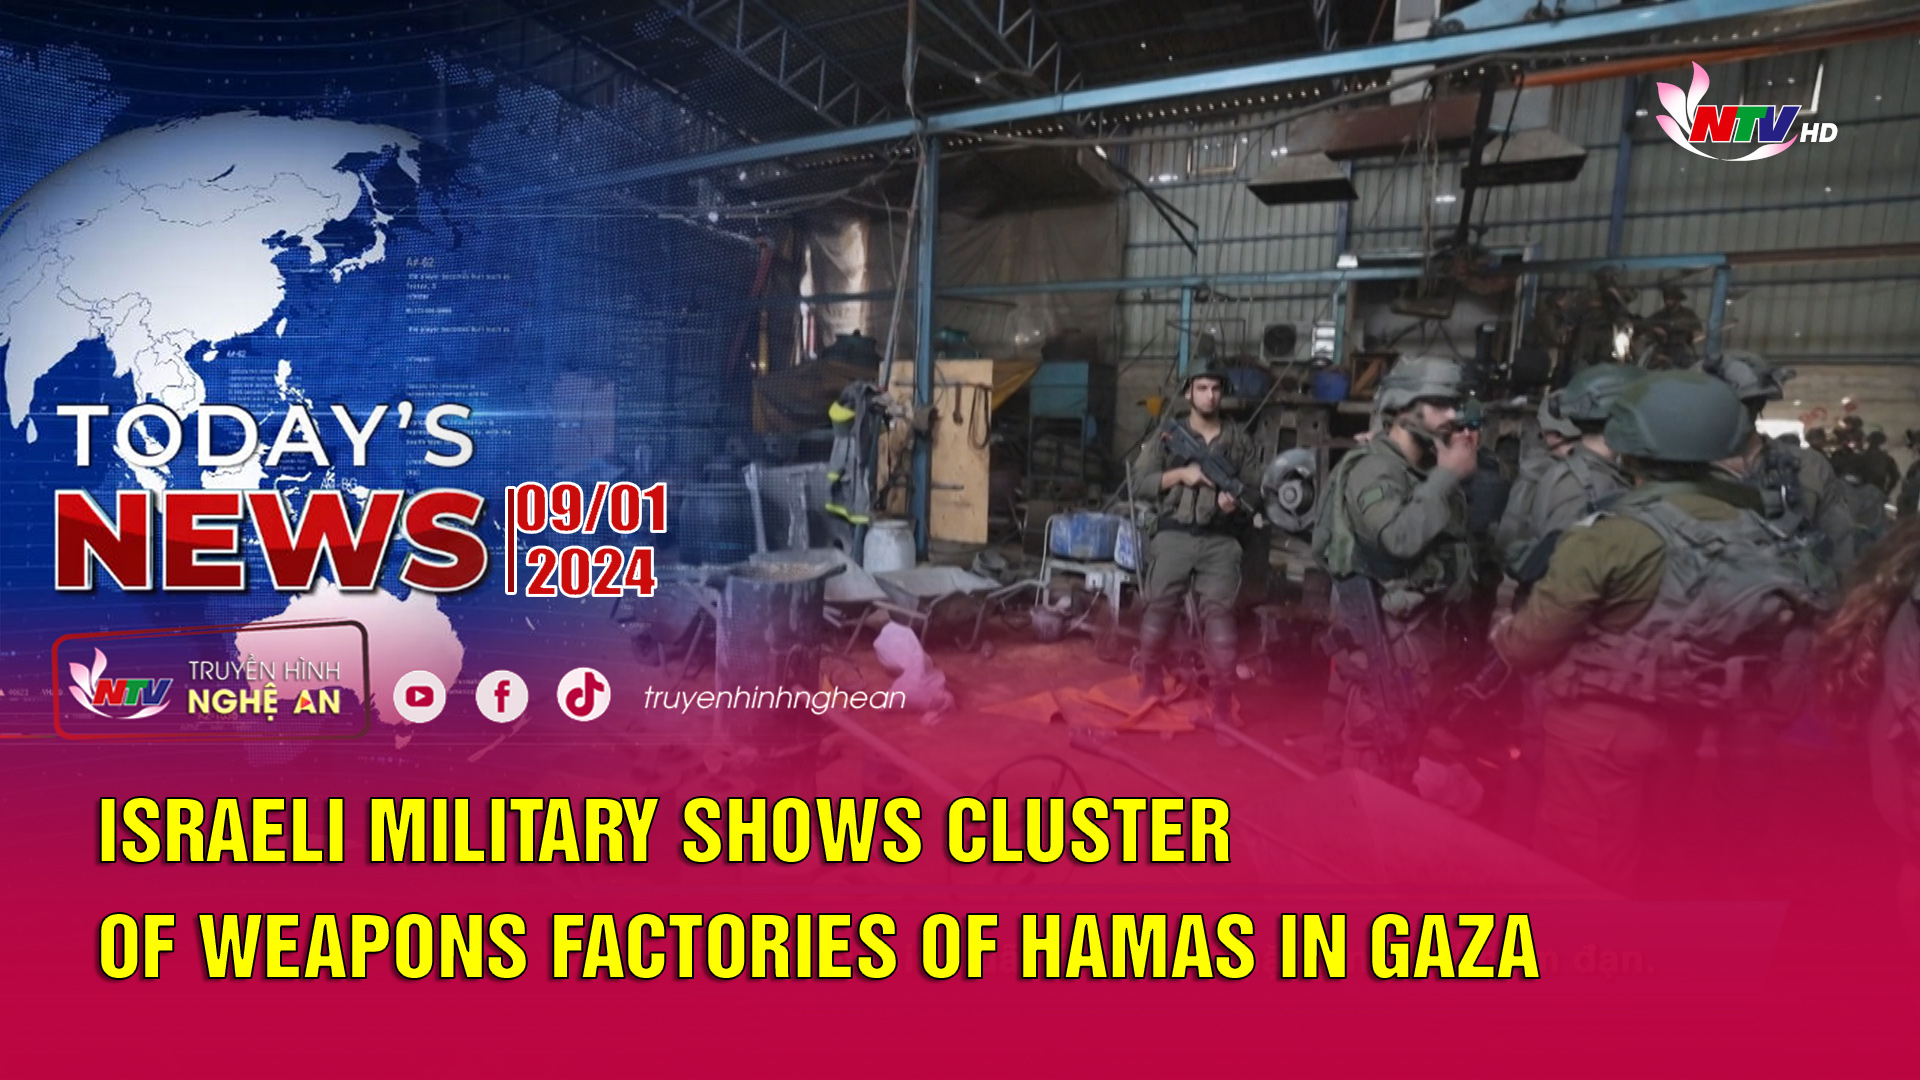 Today's News - 09/01/2024: Israeli military shows cluster of weapons factories of Hamas in Gaza